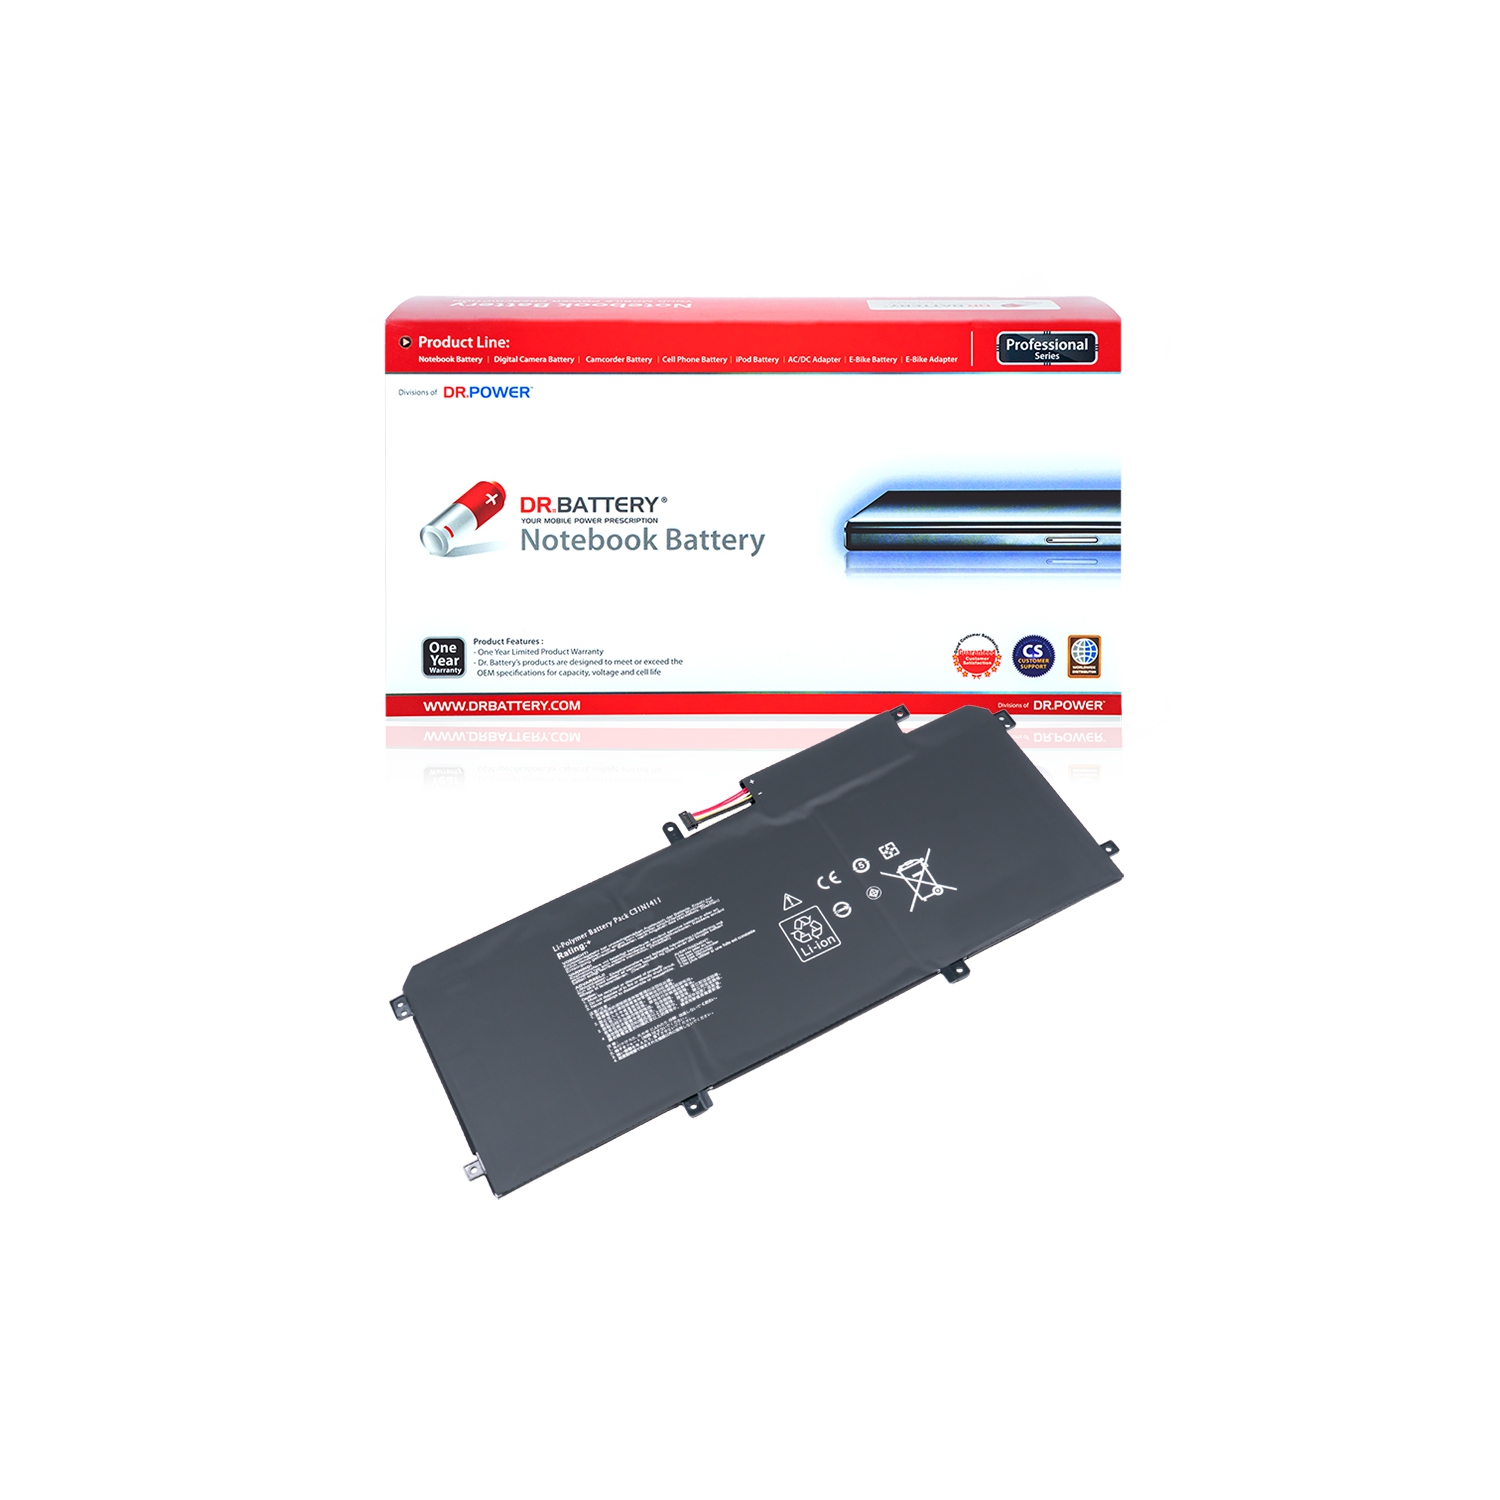 DR. BATTERY - Replacement for Asus ZenBook UX305 / UX305CA / UX305CA M-6Y30 / UX305CA-1A / 0B200-01180000 / C31N1411 [11.4V / 3830mAh / 43.6Wh] ***Free Shipping***